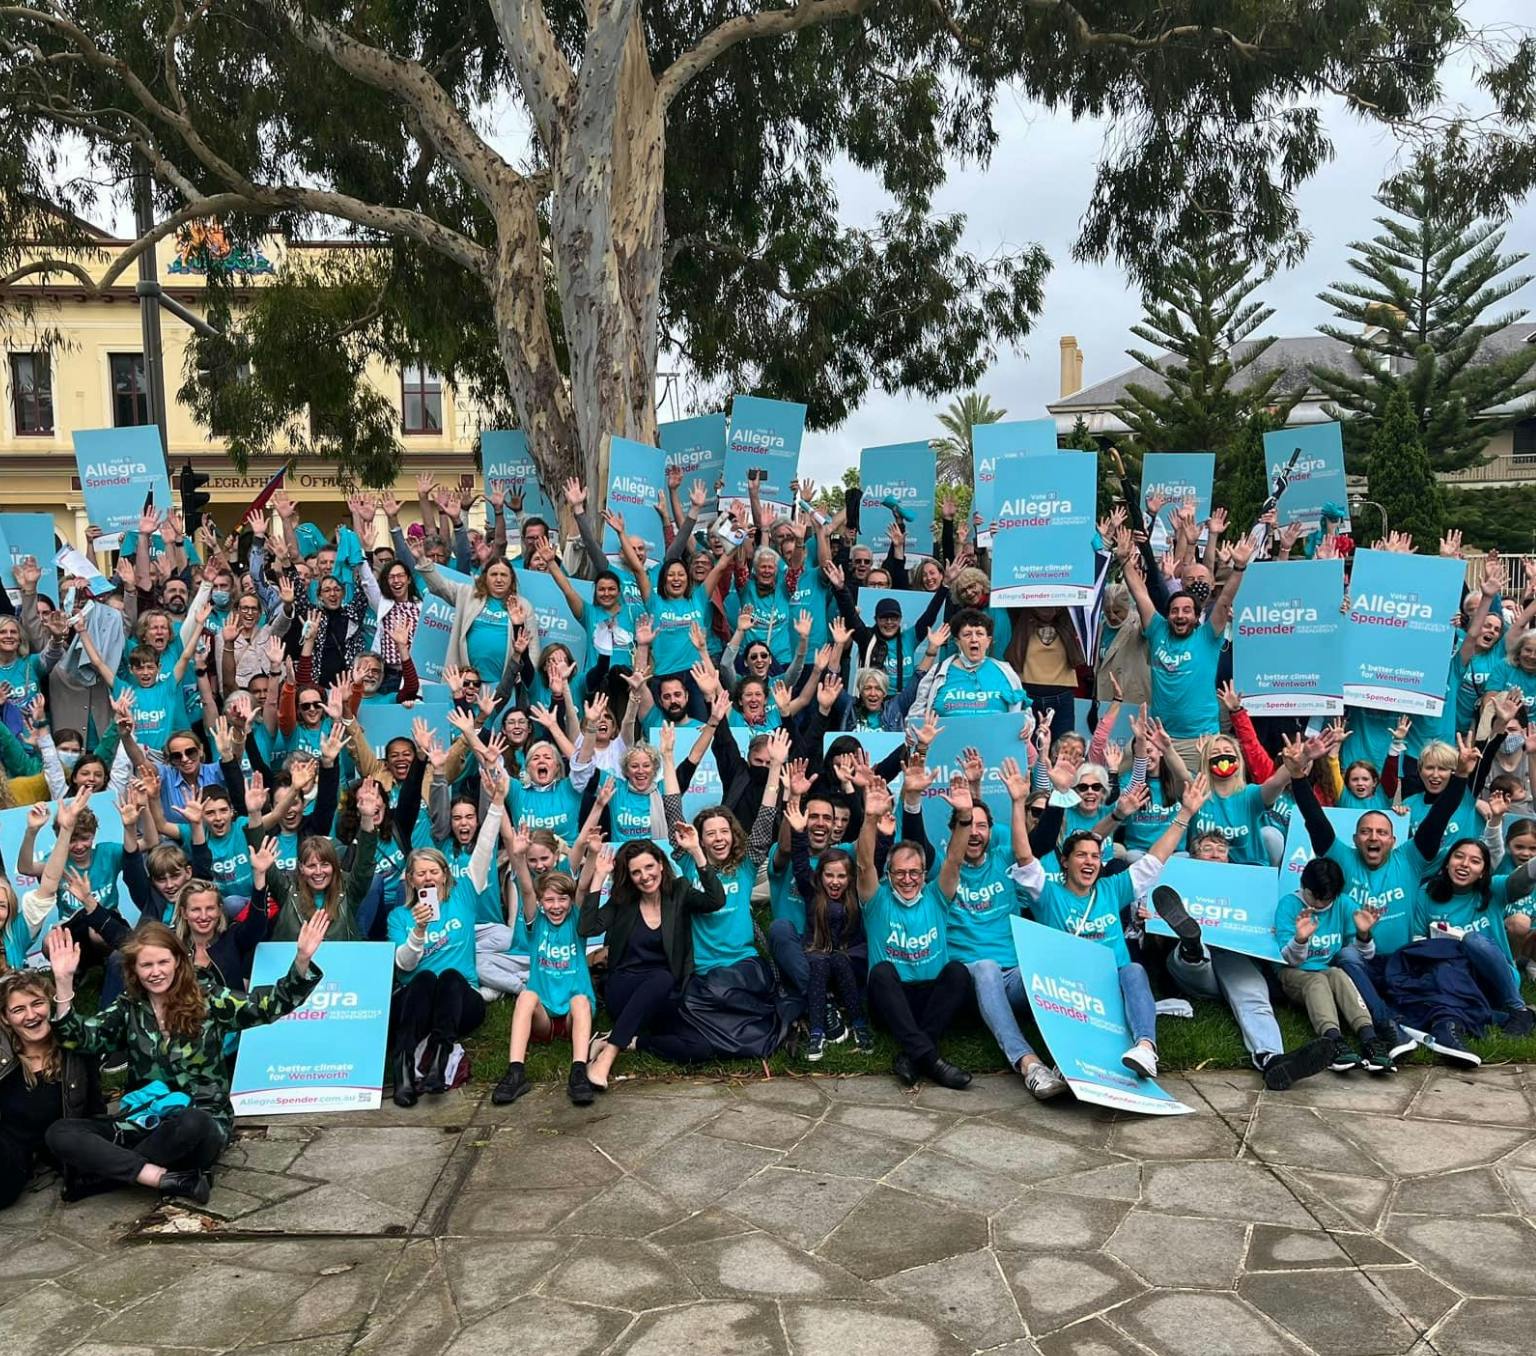 Group of people are pictured with their hands in the air celebrating. They are wearing teal coloured tshirts and holding teal coloured signs that read Allegra Spender